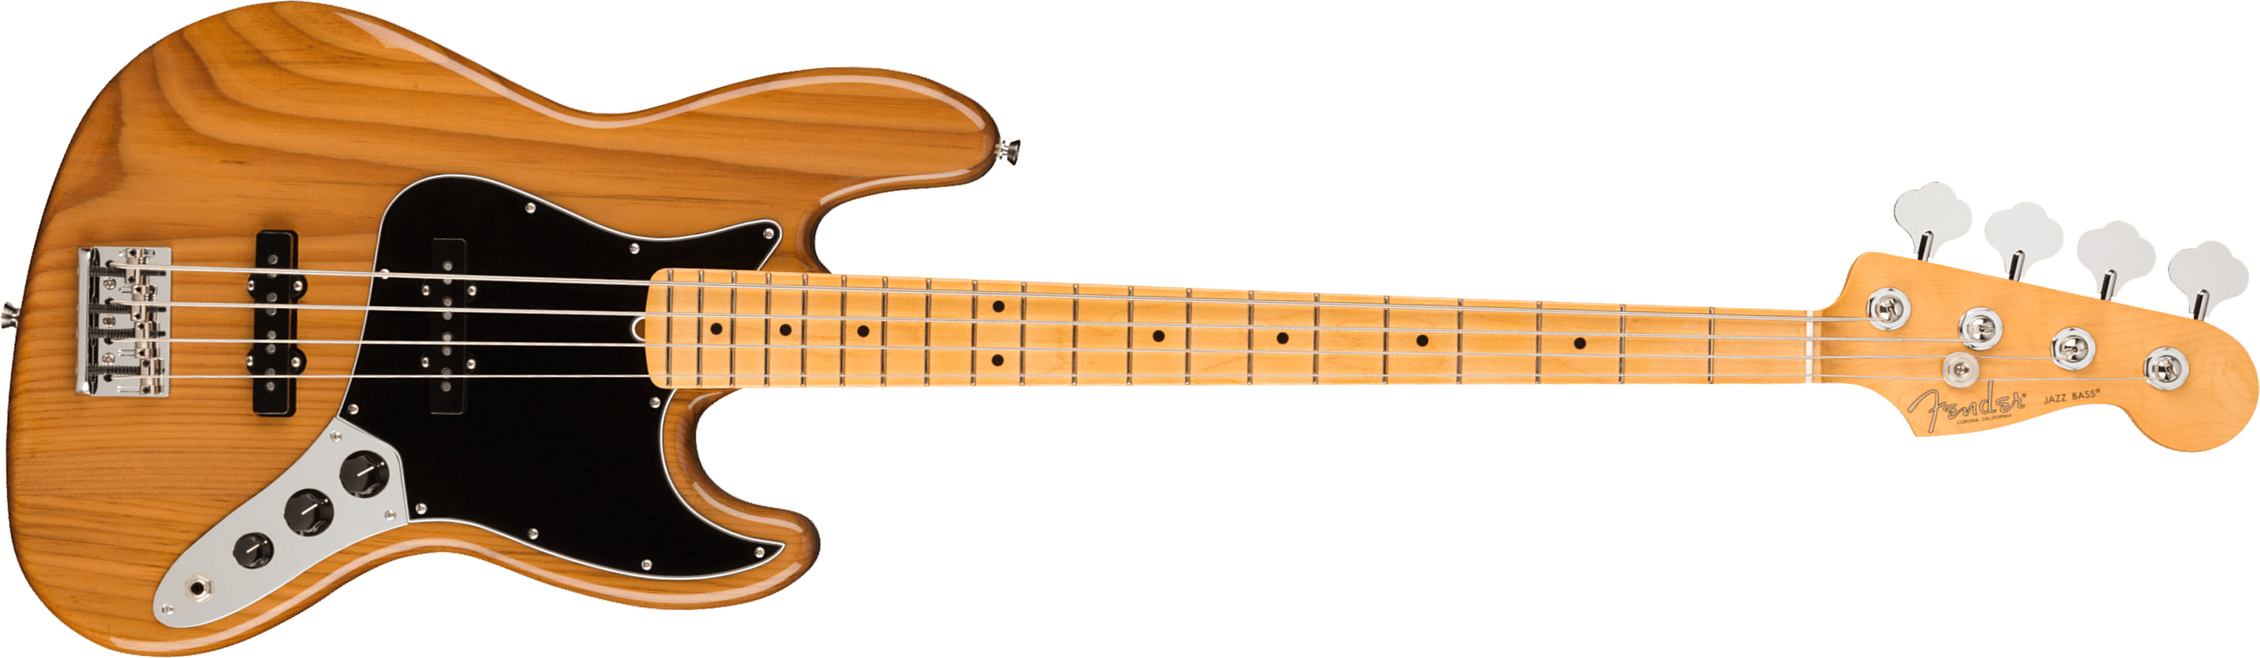 Fender Jazz Bass American Professional Ii Usa Mn - Roasted Pine - Basse Électrique Solid Body - Main picture